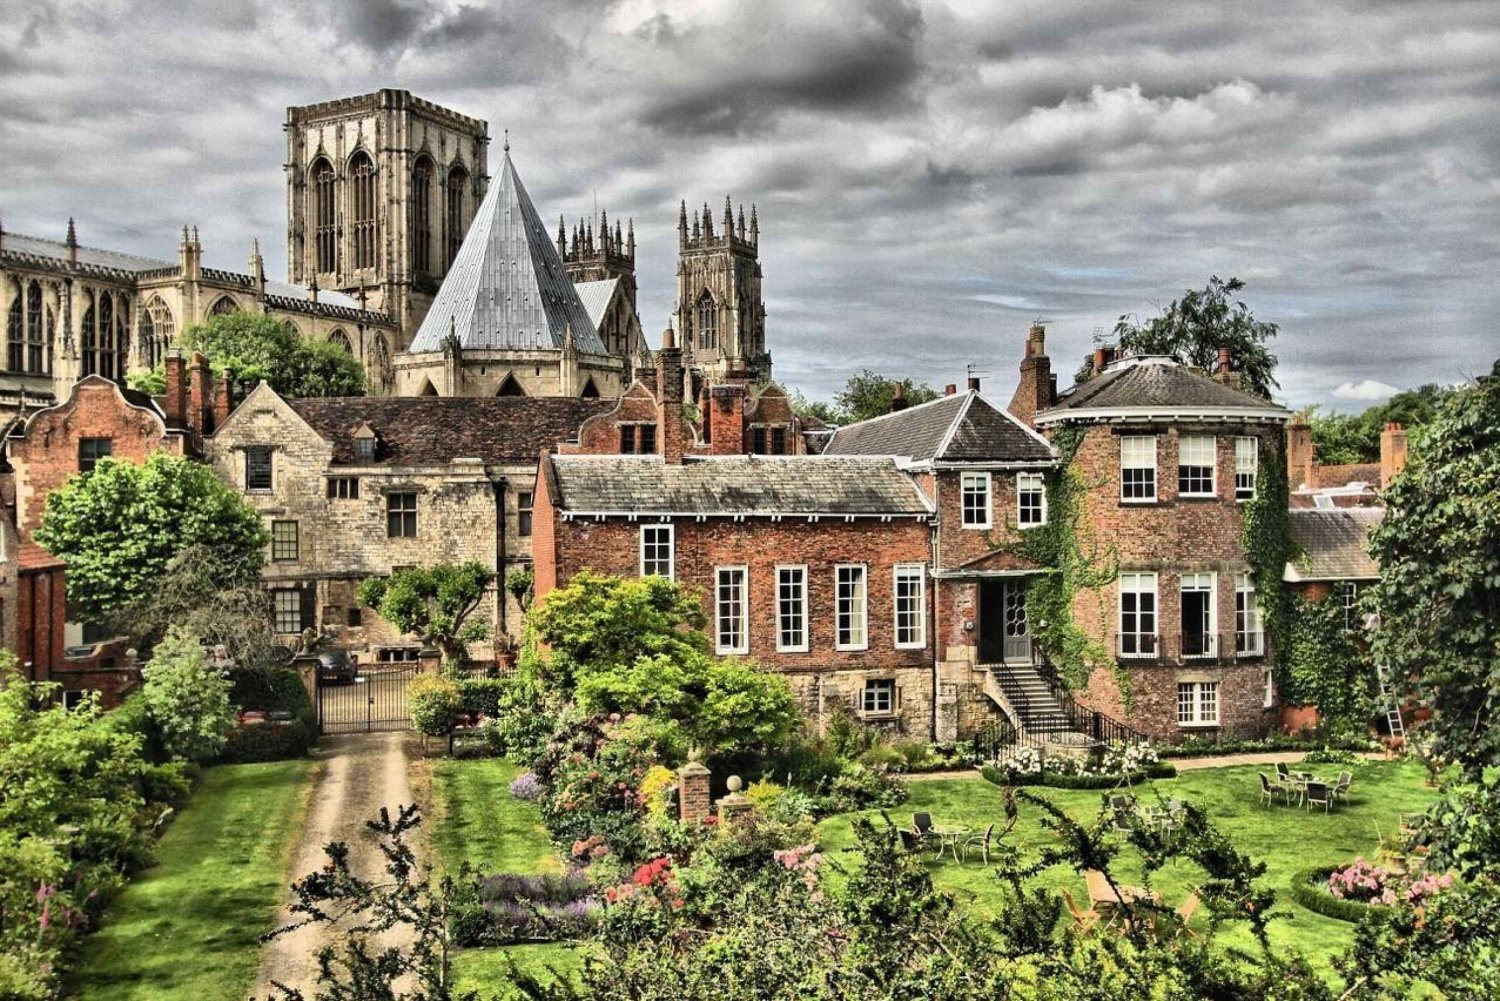 Embark-on-a-Guided-Walking-Tour-of-Yorks-Historic-Gardens